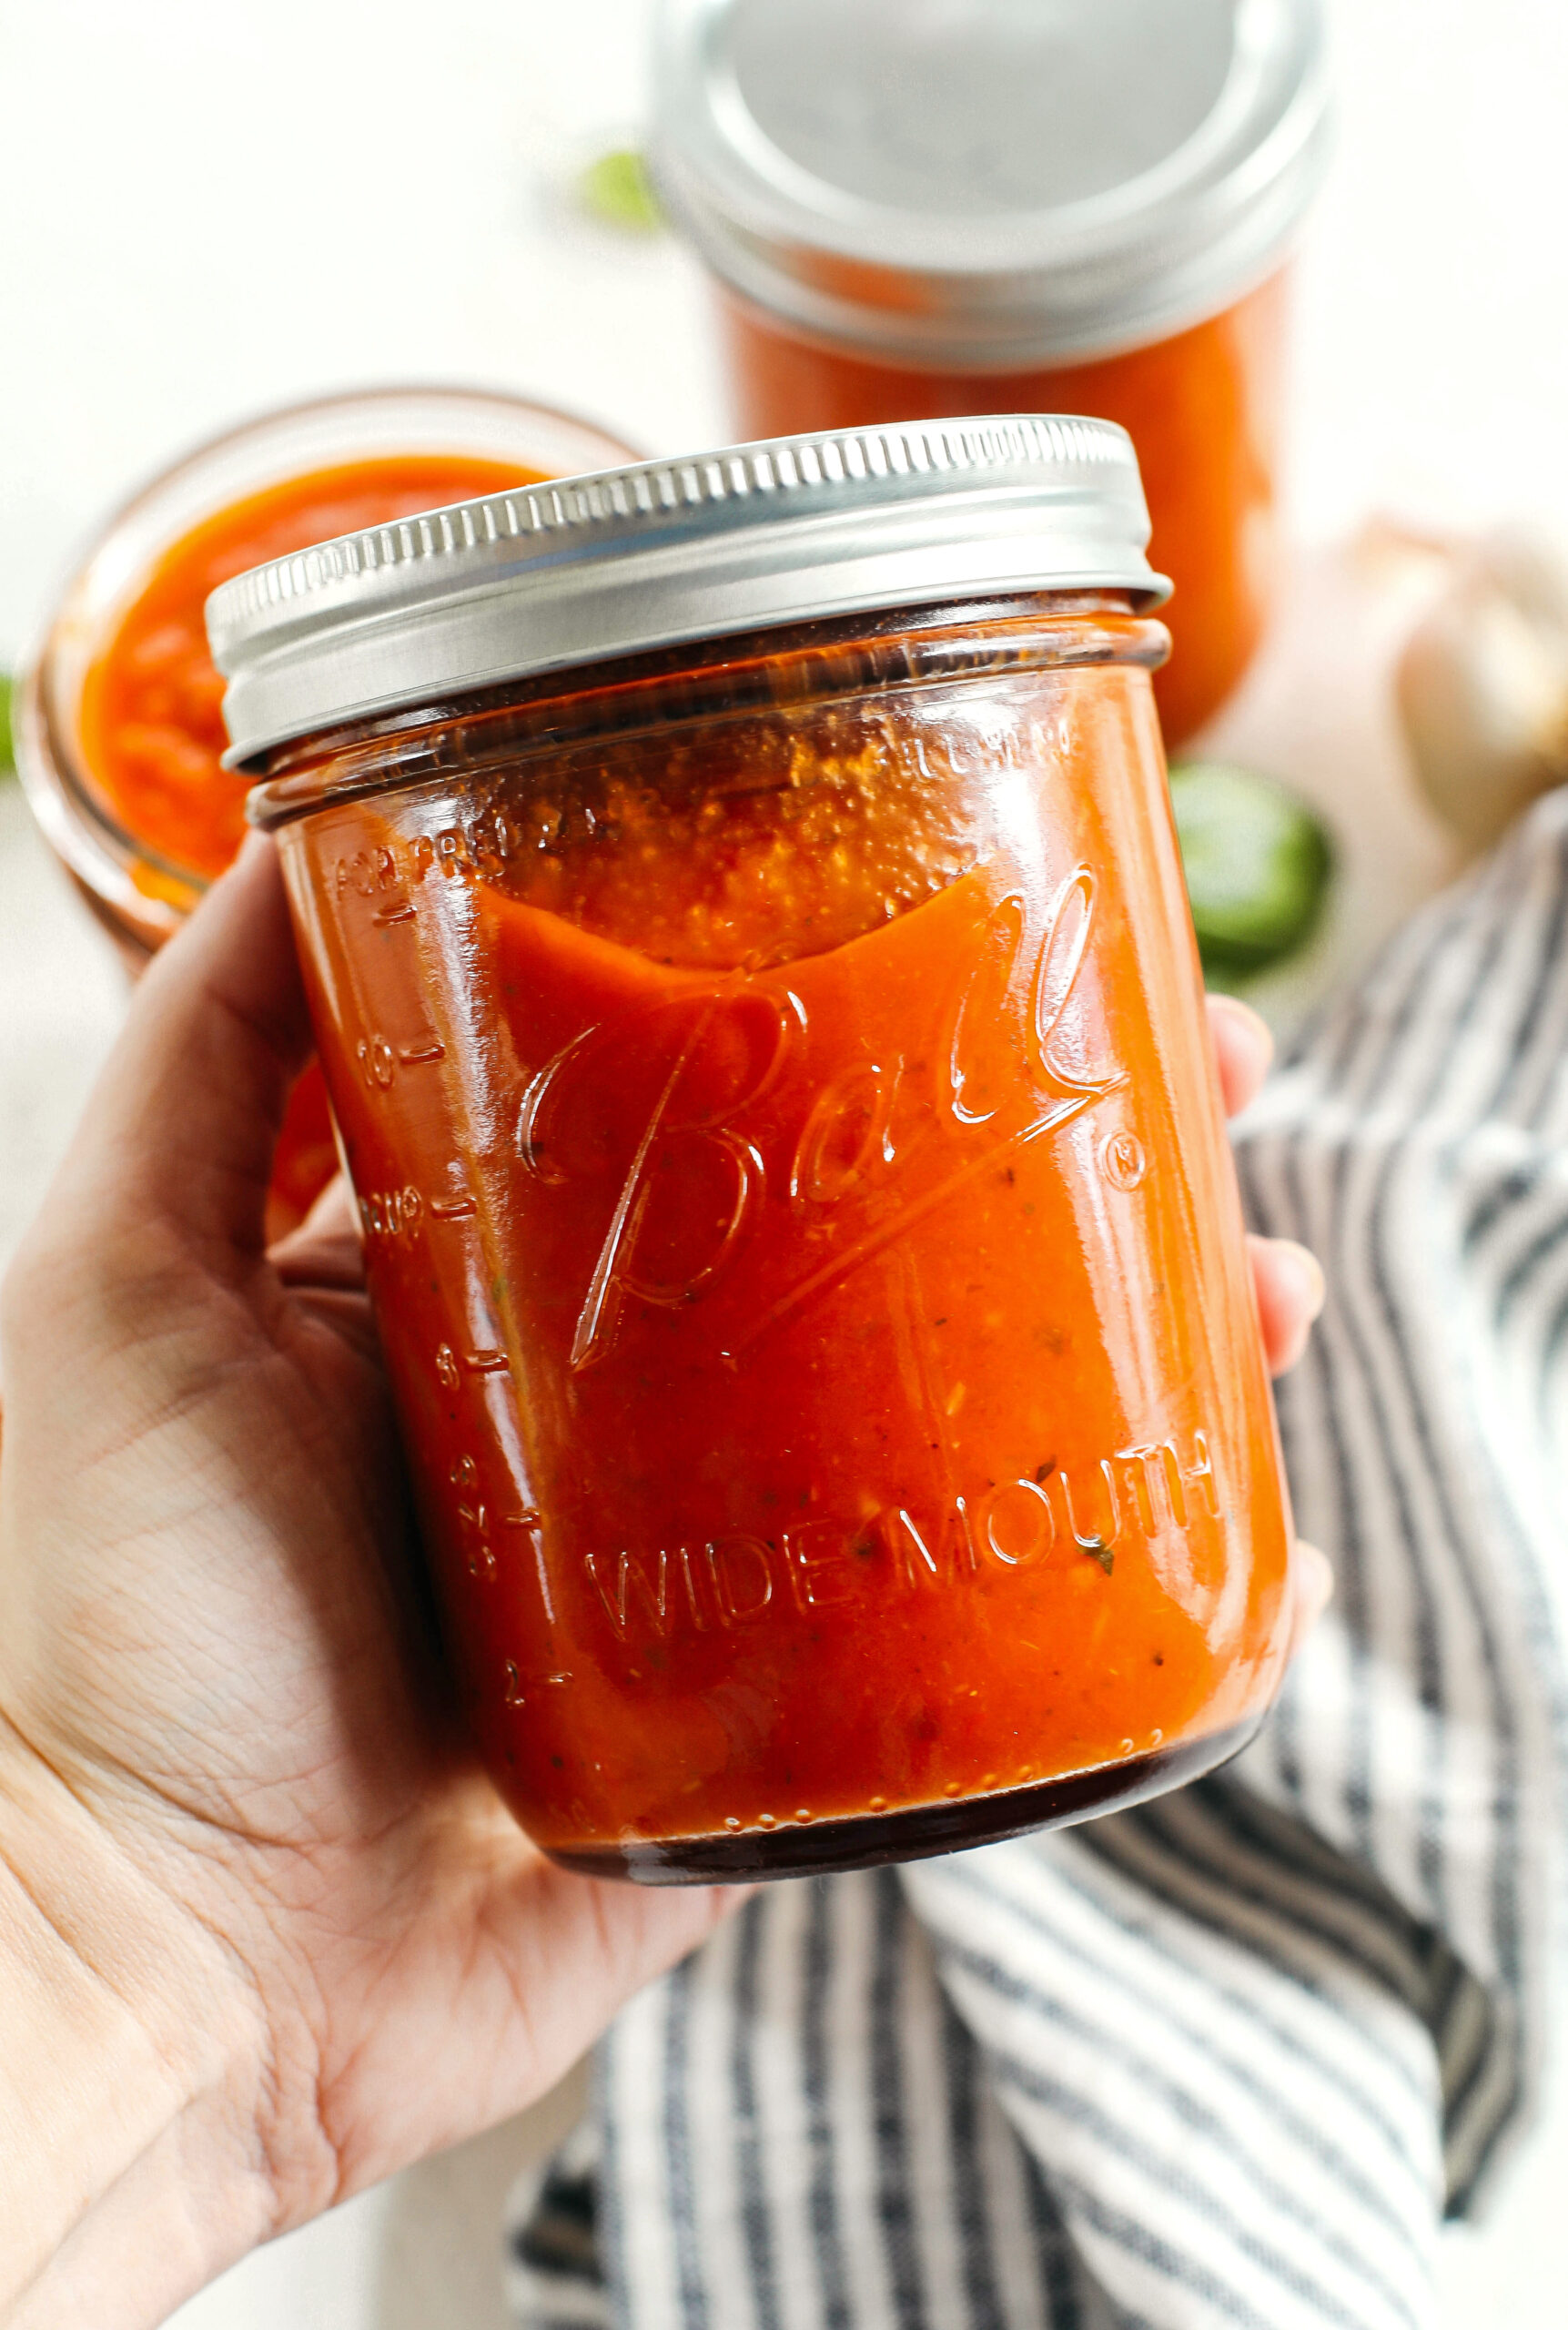 This Loaded Veggie Tomato Sauce is packed with zucchini, carrots, bell peppers, celery and onions all simmered and blended together for the most delicious marinara that can be used with pasta, meatballs, on top of pizza, as a dipping sauce and so much more!